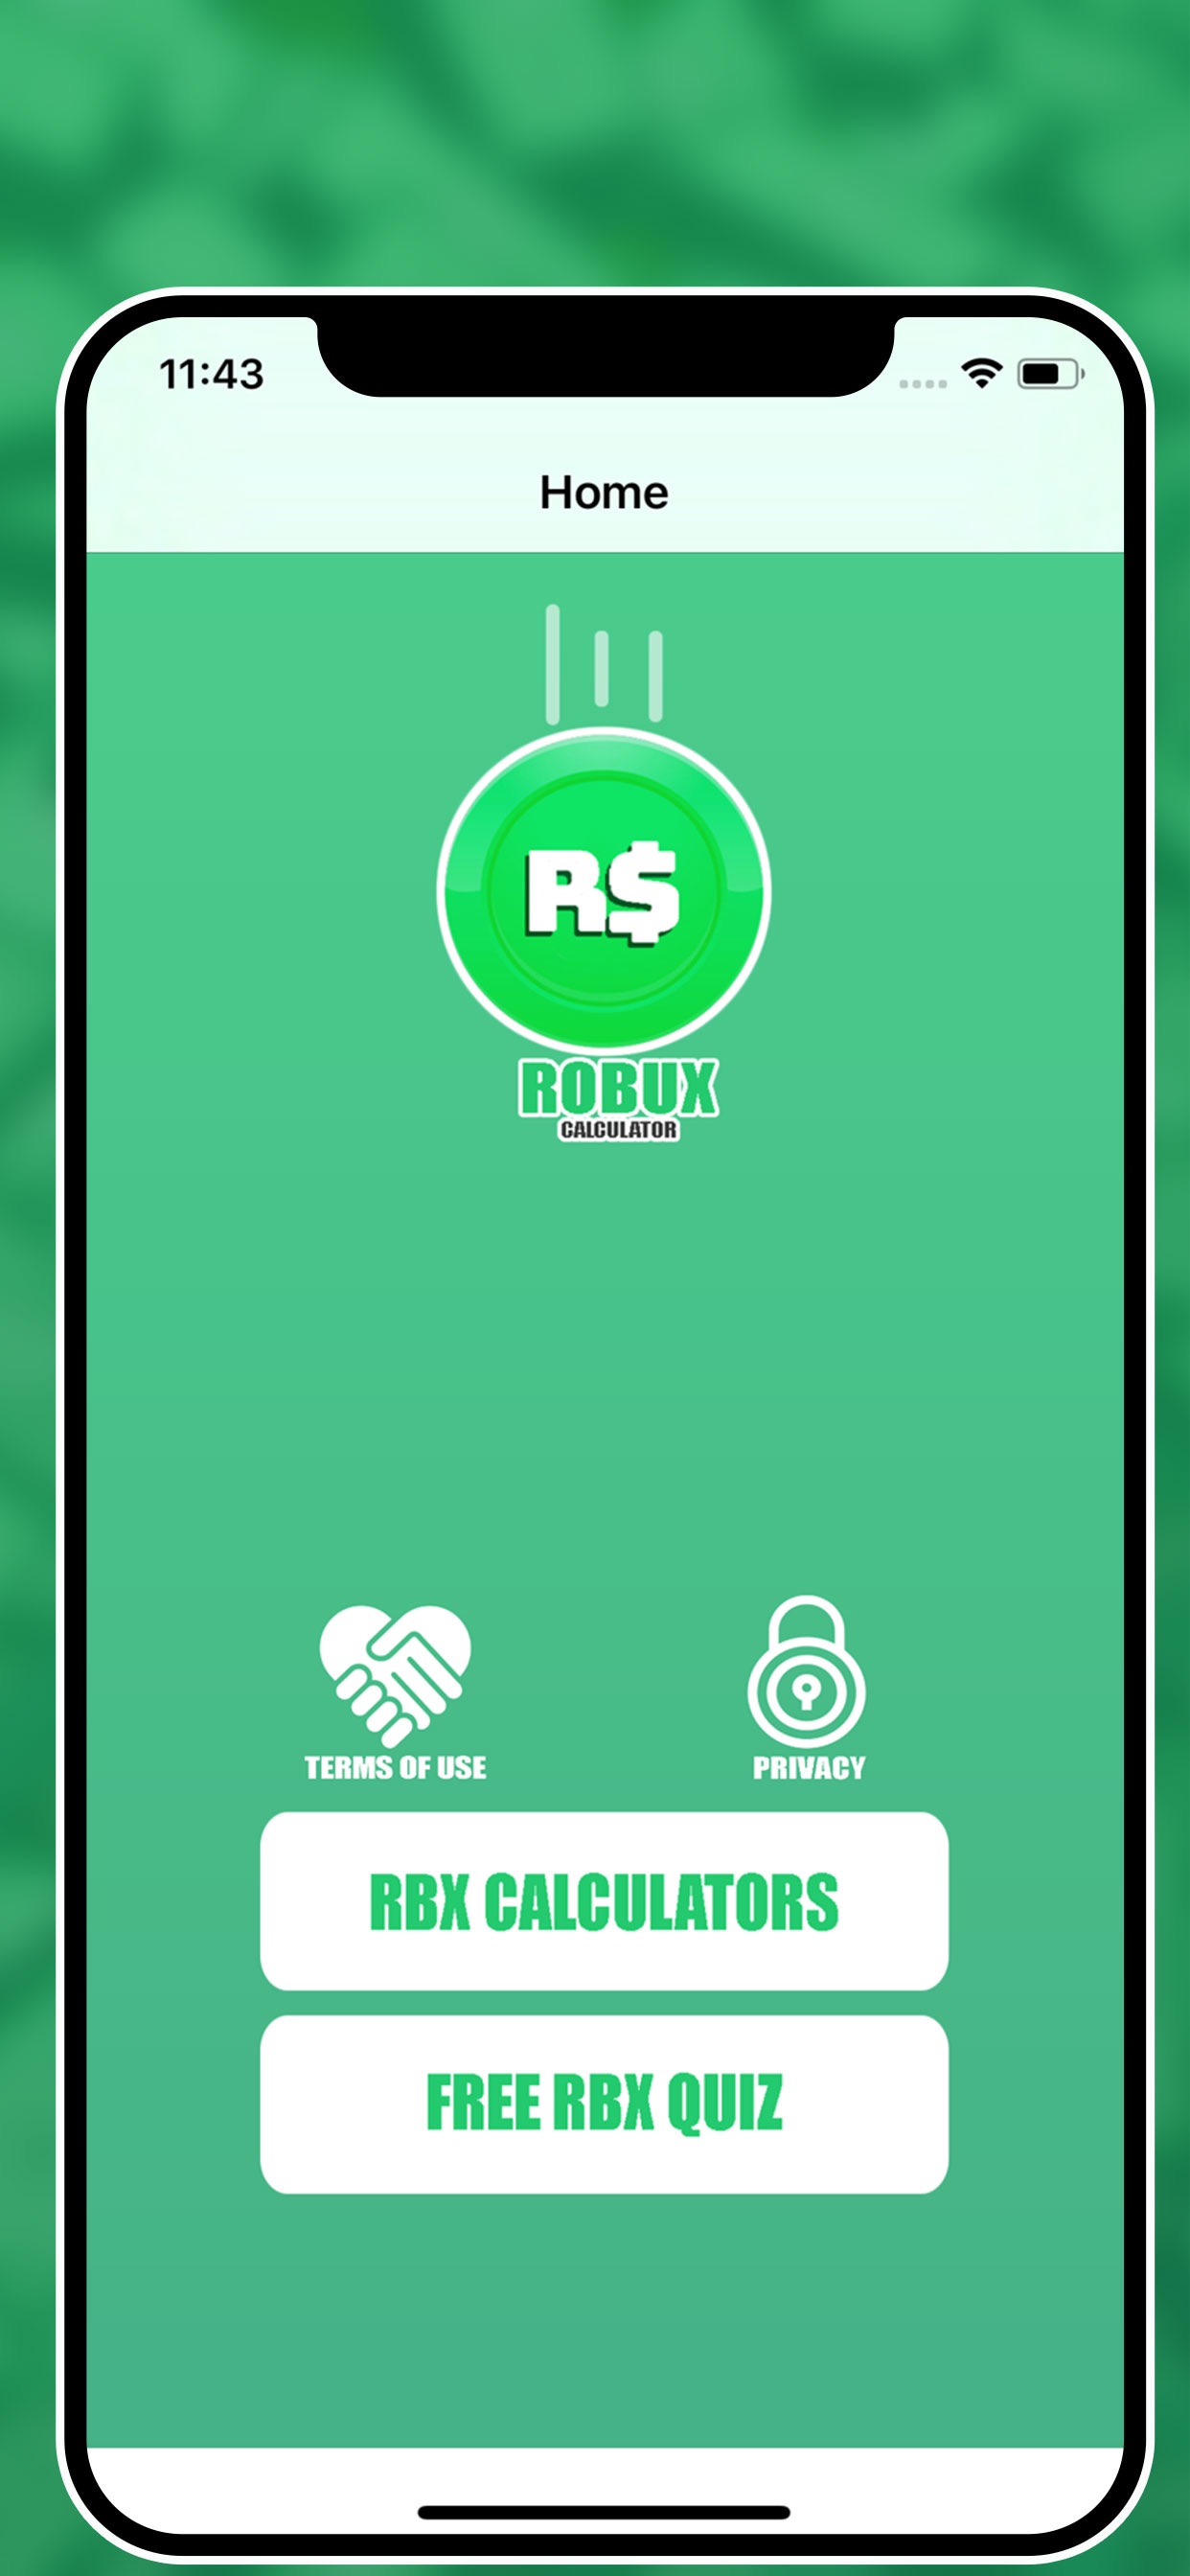 Robux Calculator For Rblox App Store Review Aso Revenue Downloads Appfollow - daily robux calculator on the app store